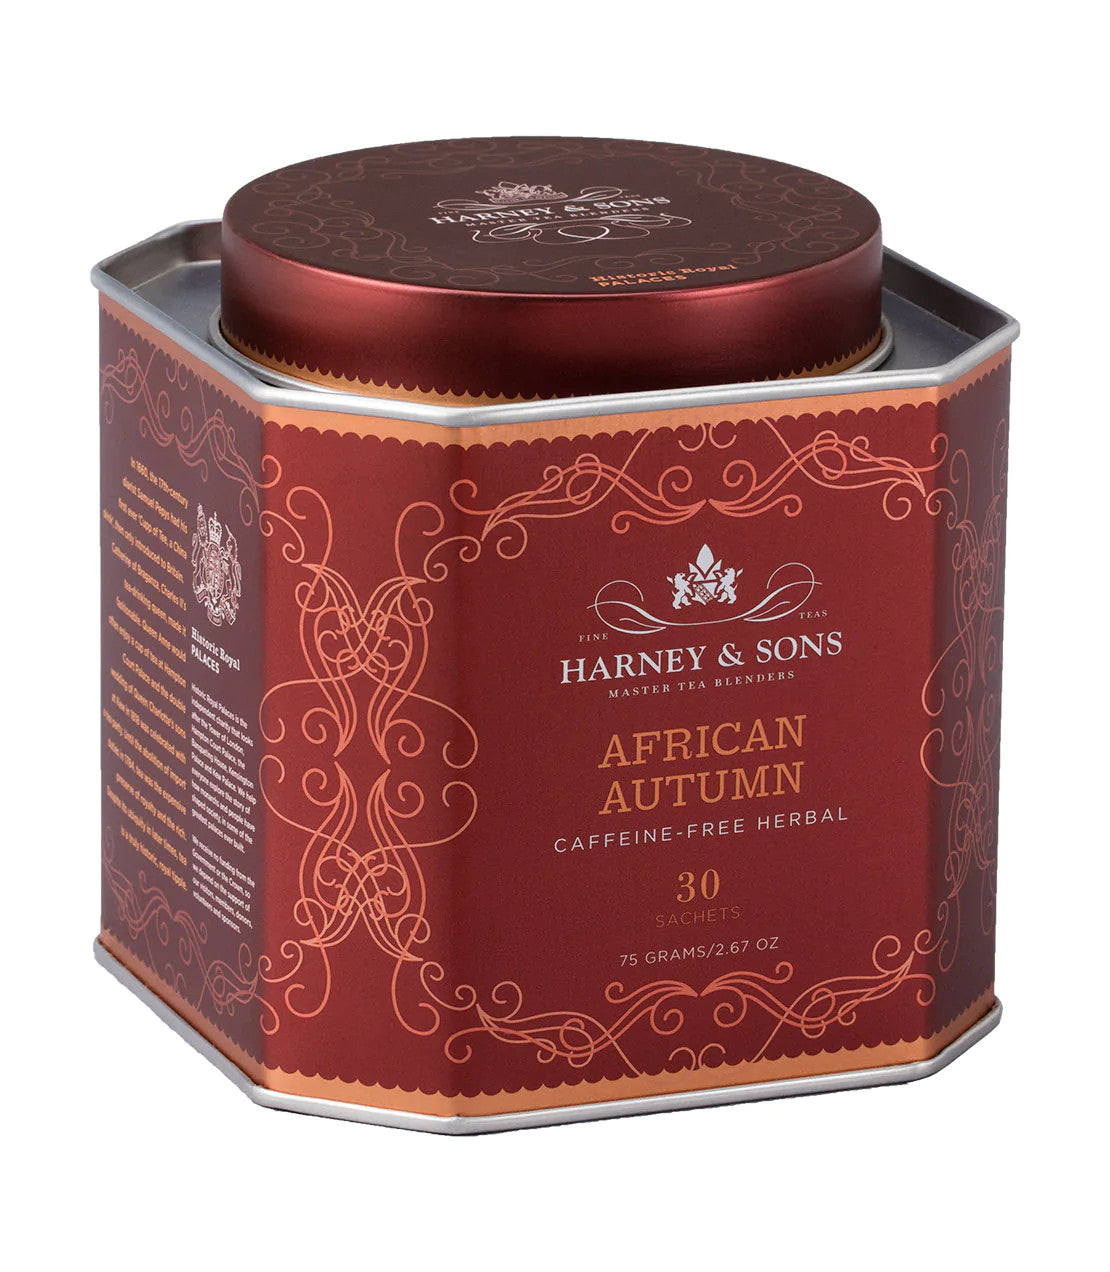 African Autumn Herbal Tea by Harney & Sons.